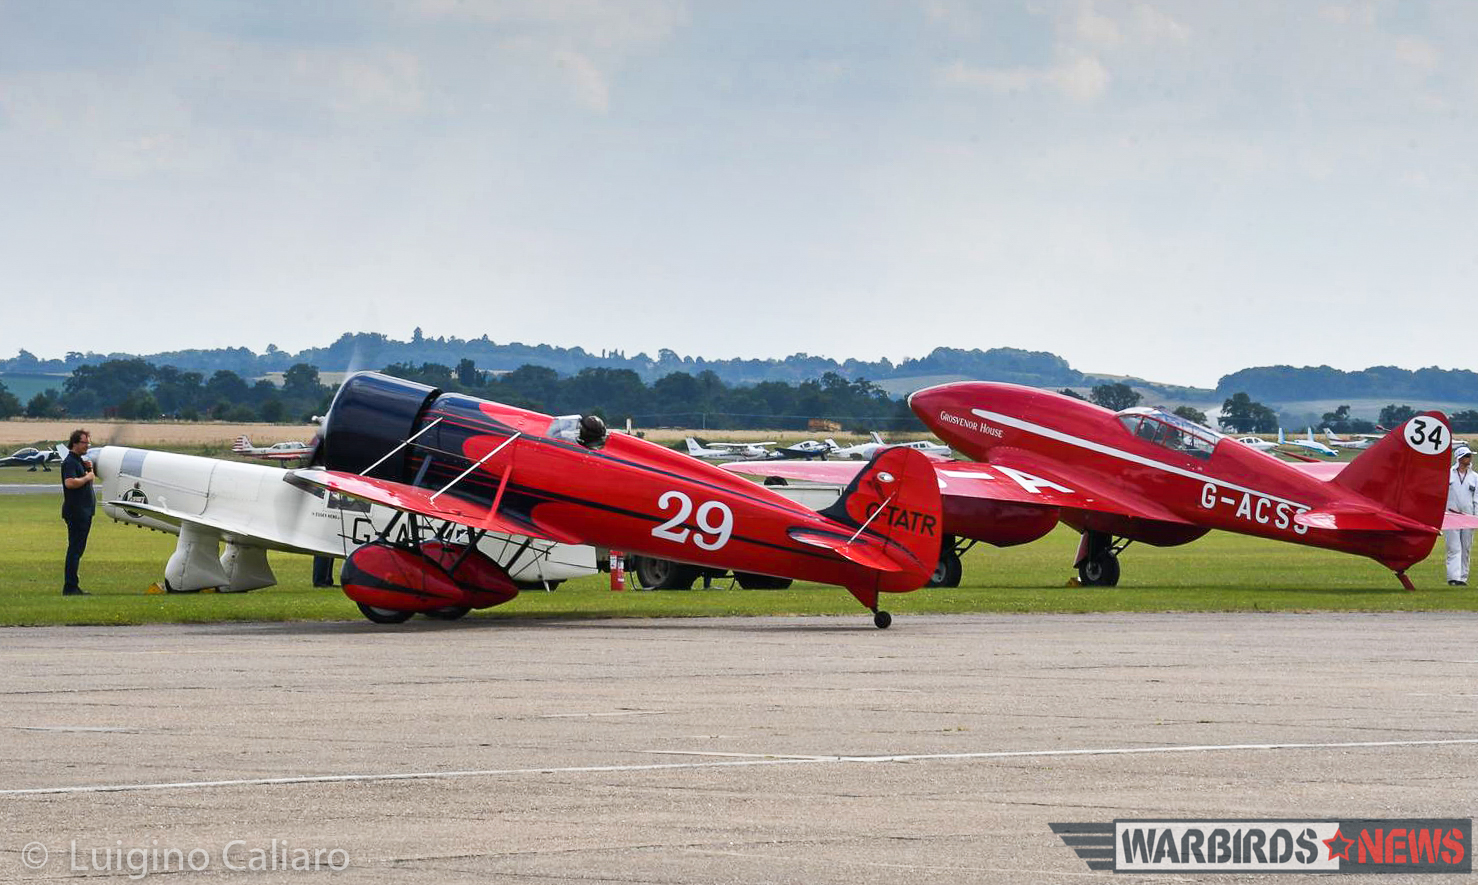 The racers taxiing out for takeoff. (photo by Luigino Caliaro)